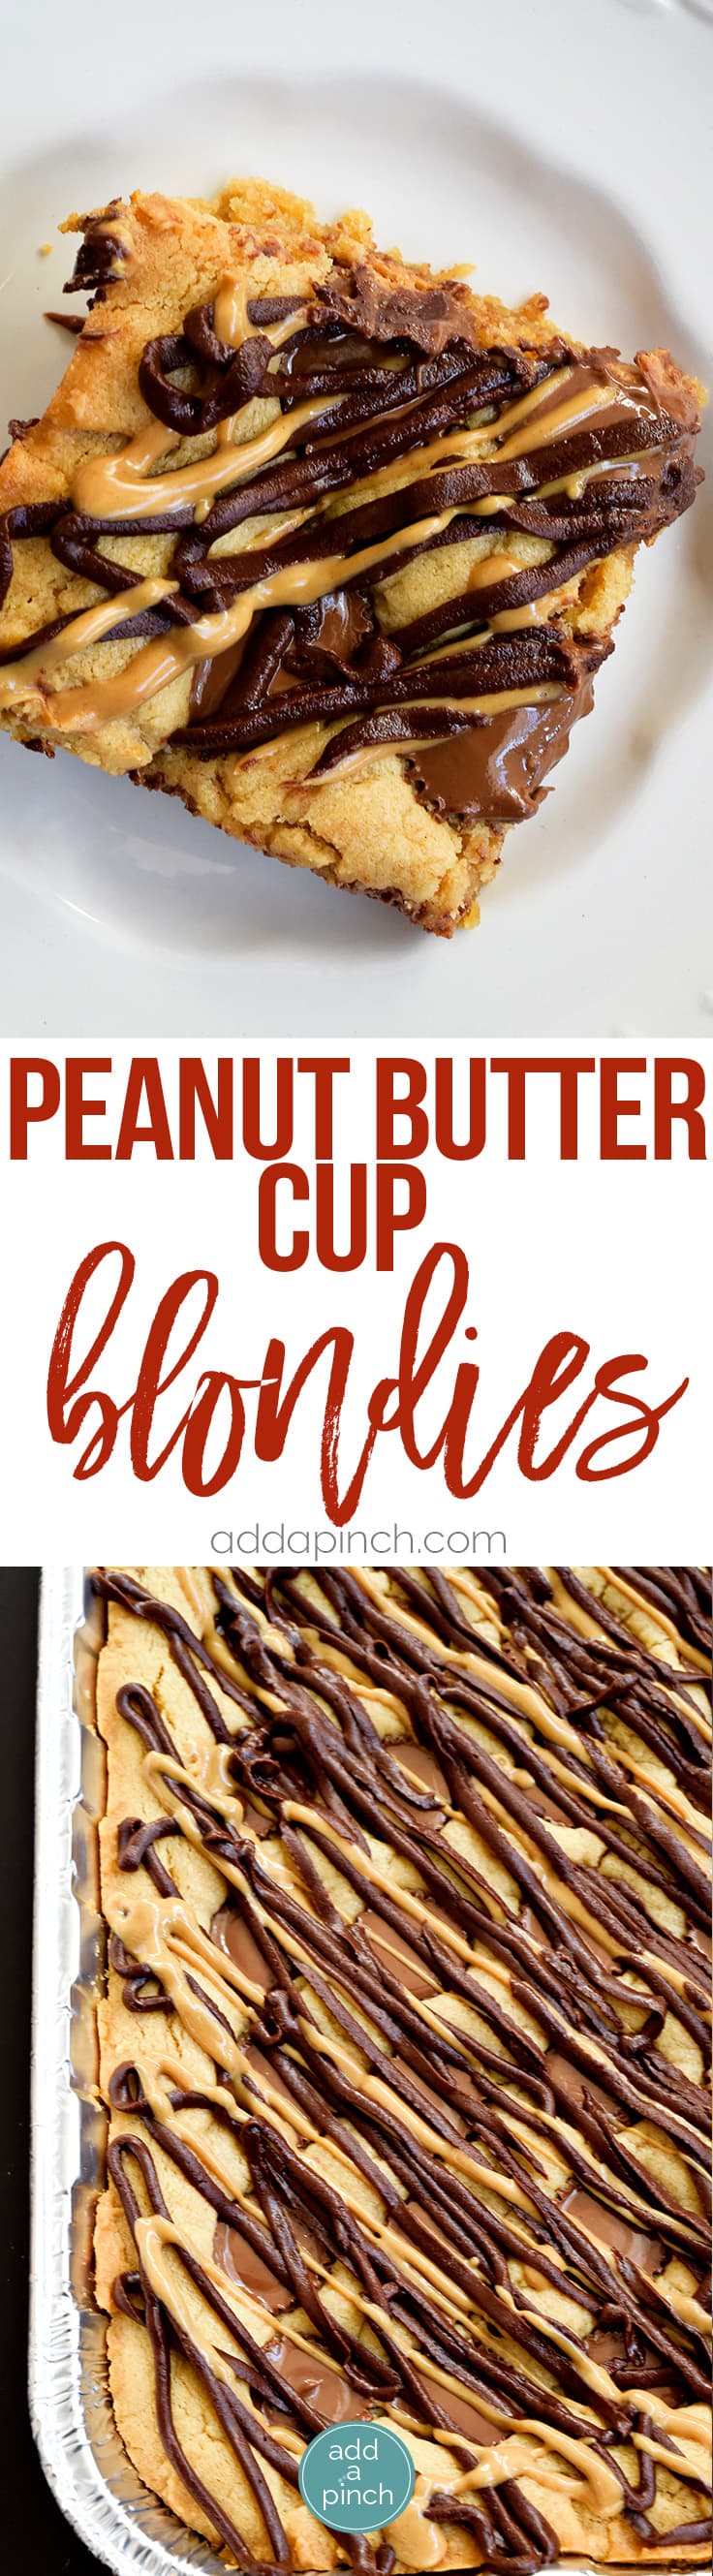 Peanut Butter Cup Blondies Recipe - This Peanut Butter Cup Blondies recipe is always a crowd favorite! So easy and perfect for the peanut butter and chocolate lover! // addapinch.com